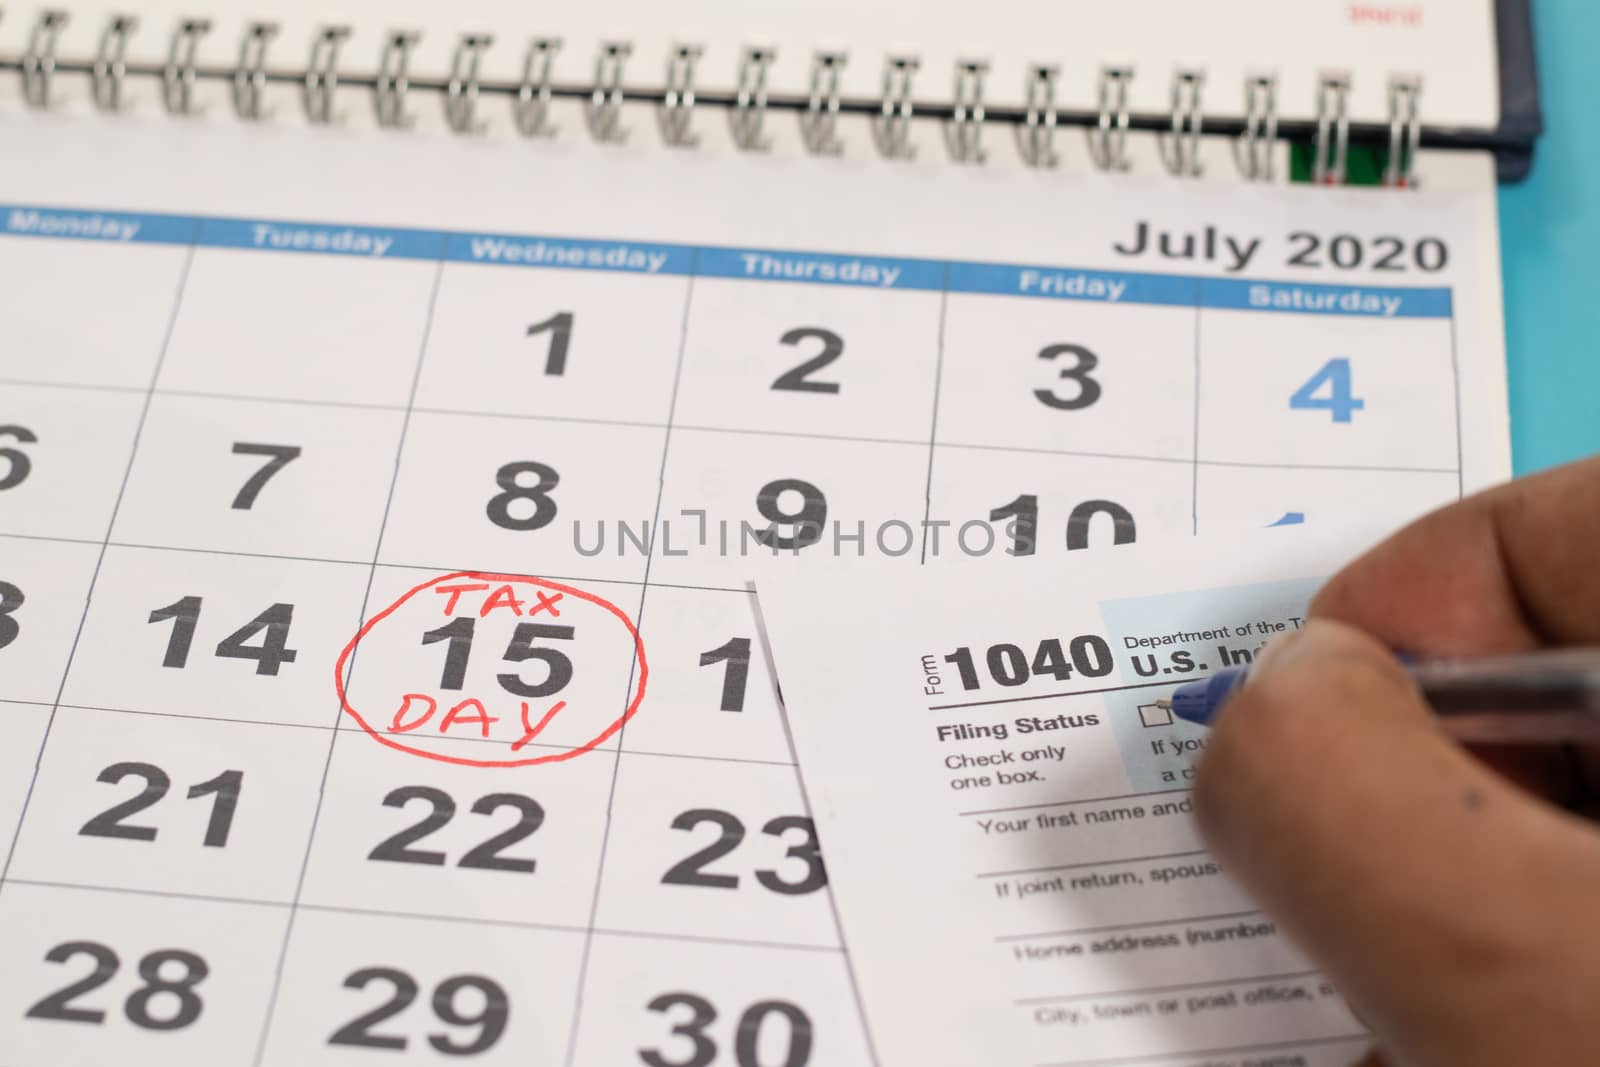 Concept of filling tax form before deadline july 15th with july 15th marked as tax day on calendar as background. by lakshmiprasad.maski@gmai.com